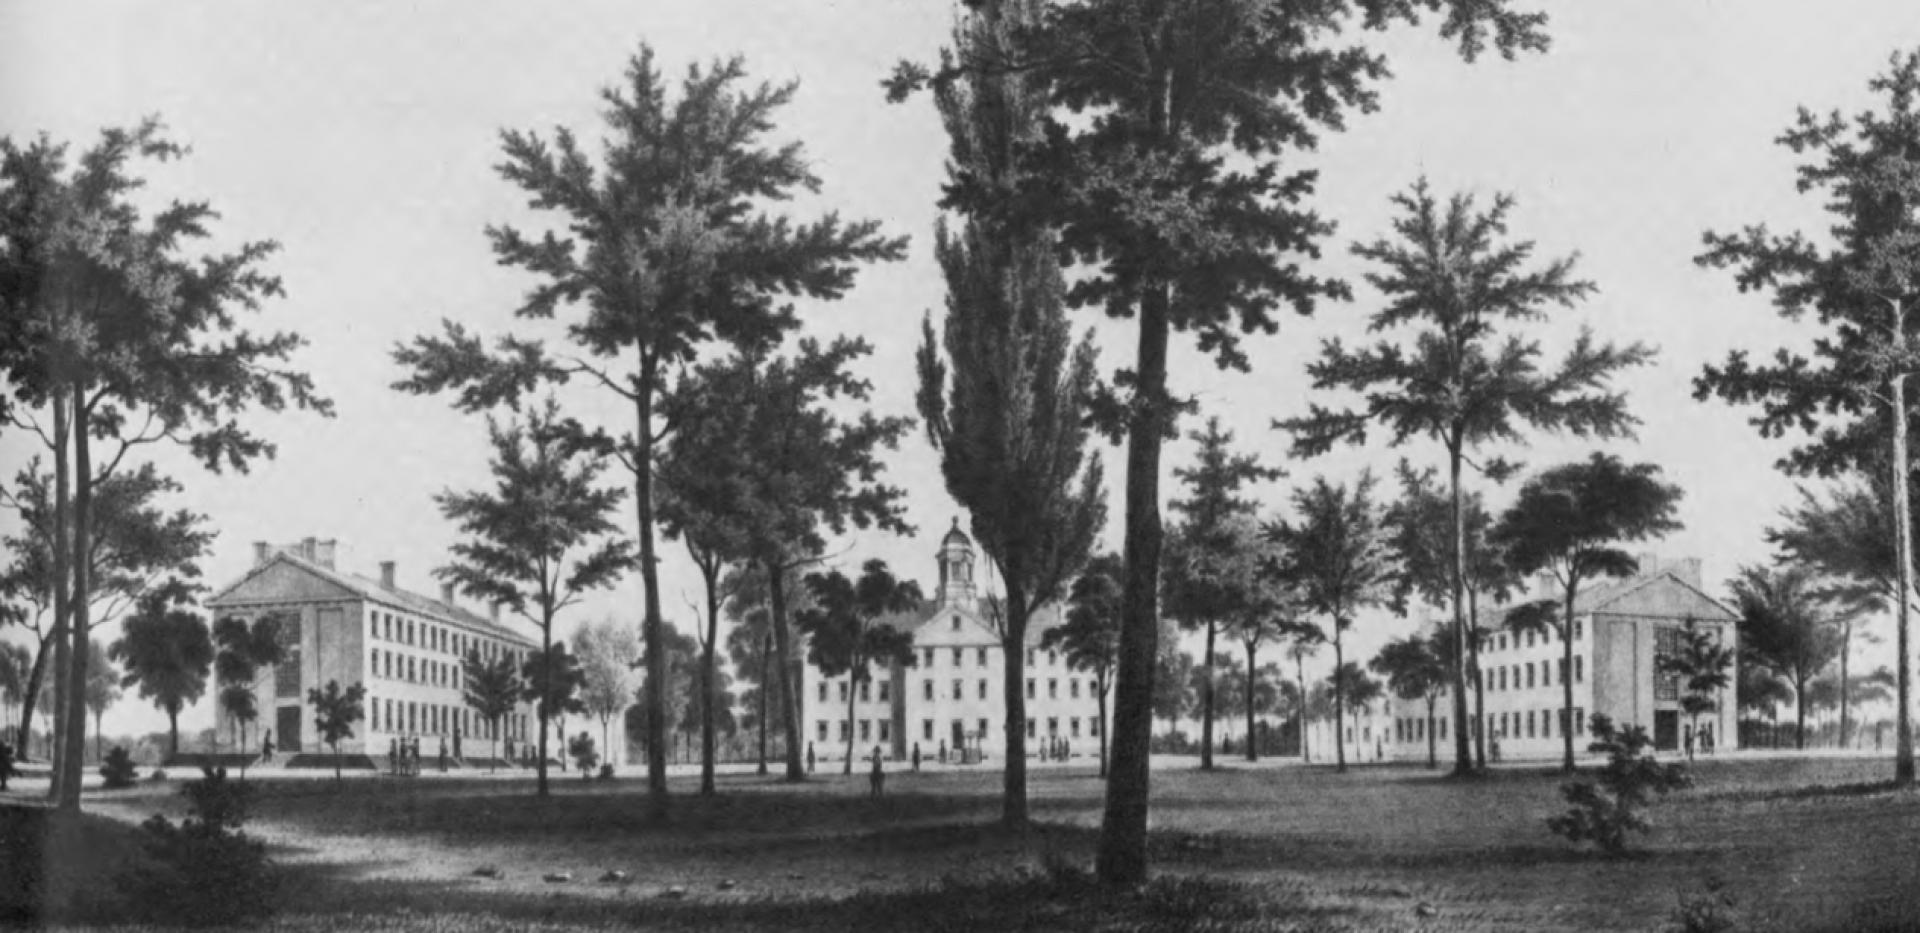 University of North Carolina Campus (1860). | Source: Turner, Campus: An American Planning Tradition